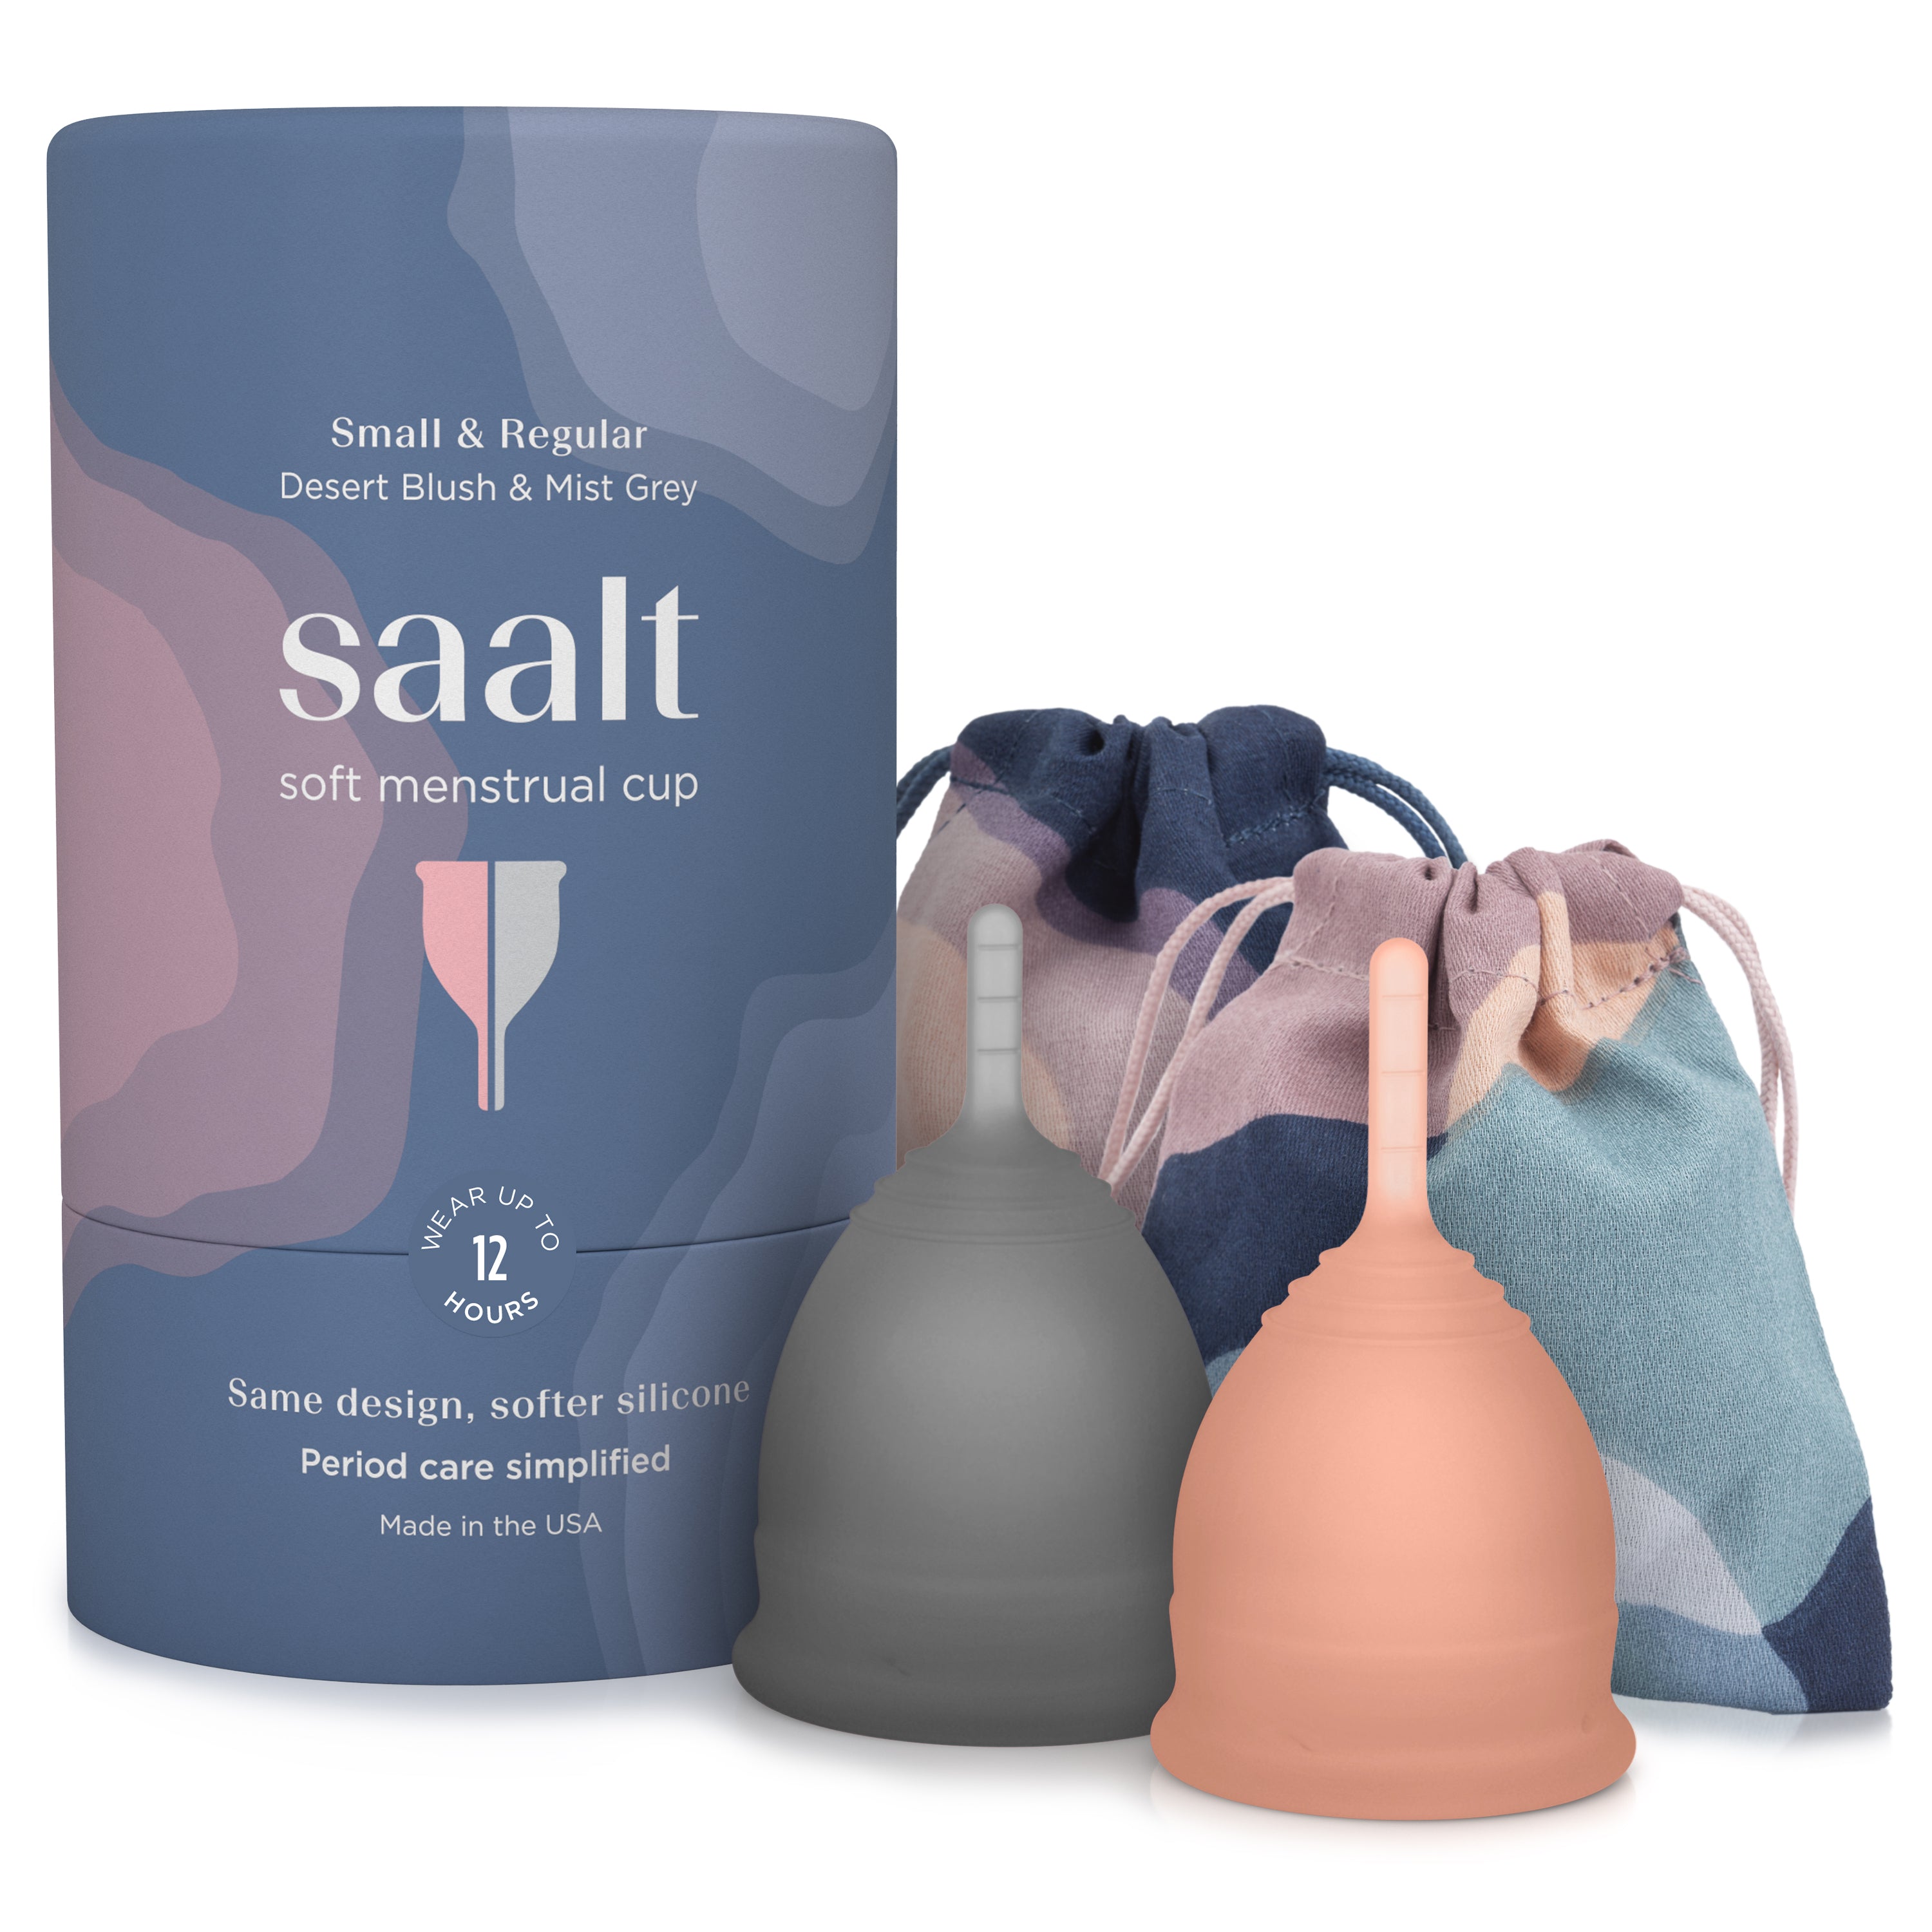 Menstrual cup duo pack in blush and grey.